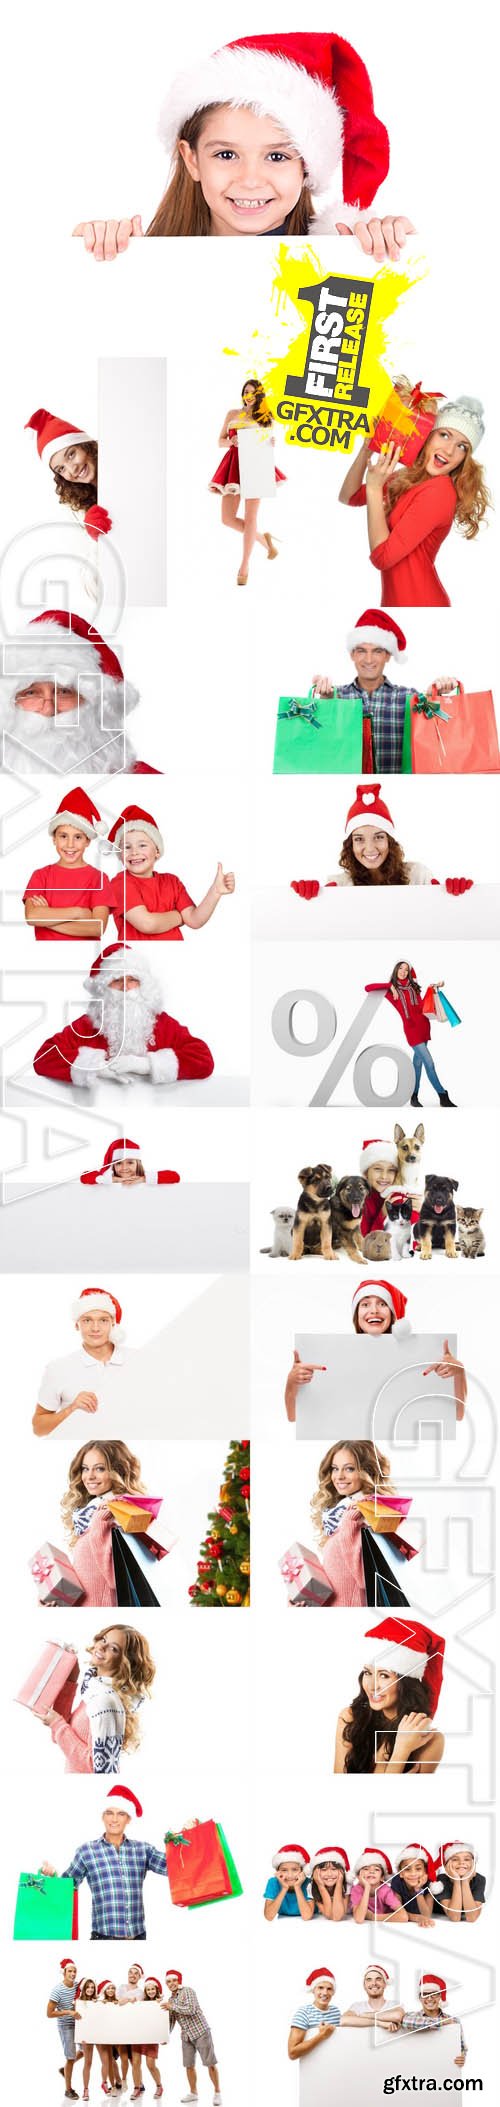 Stock Photos - Christmas People Isolated